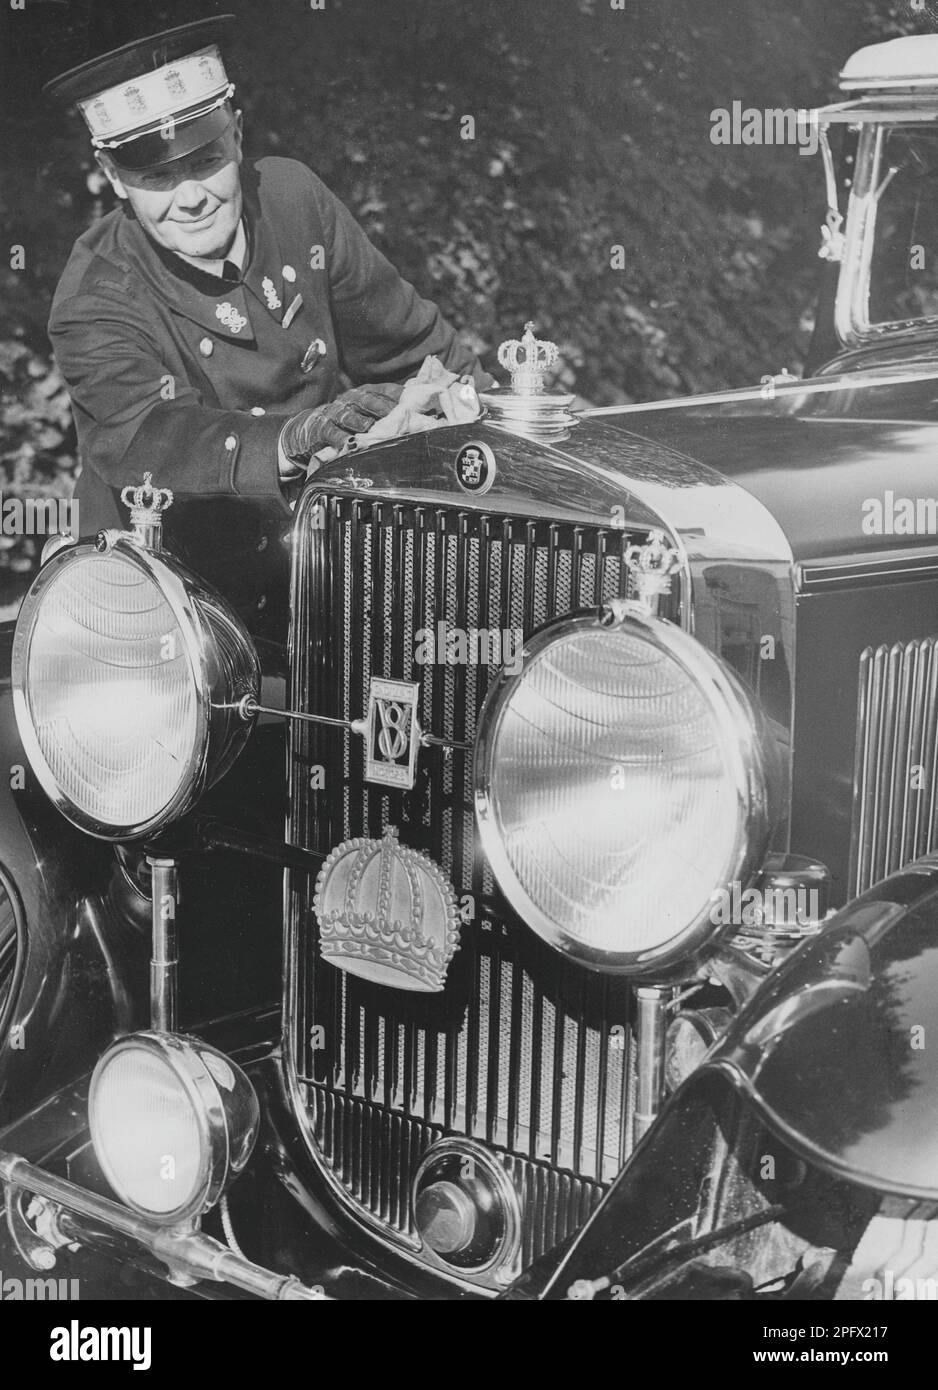 A royal chauffeur polishes the royal Cadillac. The decoration in the form of small crowns on the hood, on the lights and on the grill leaves no doubt as to who the car belongs to. Sweden 1940s Stock Photo